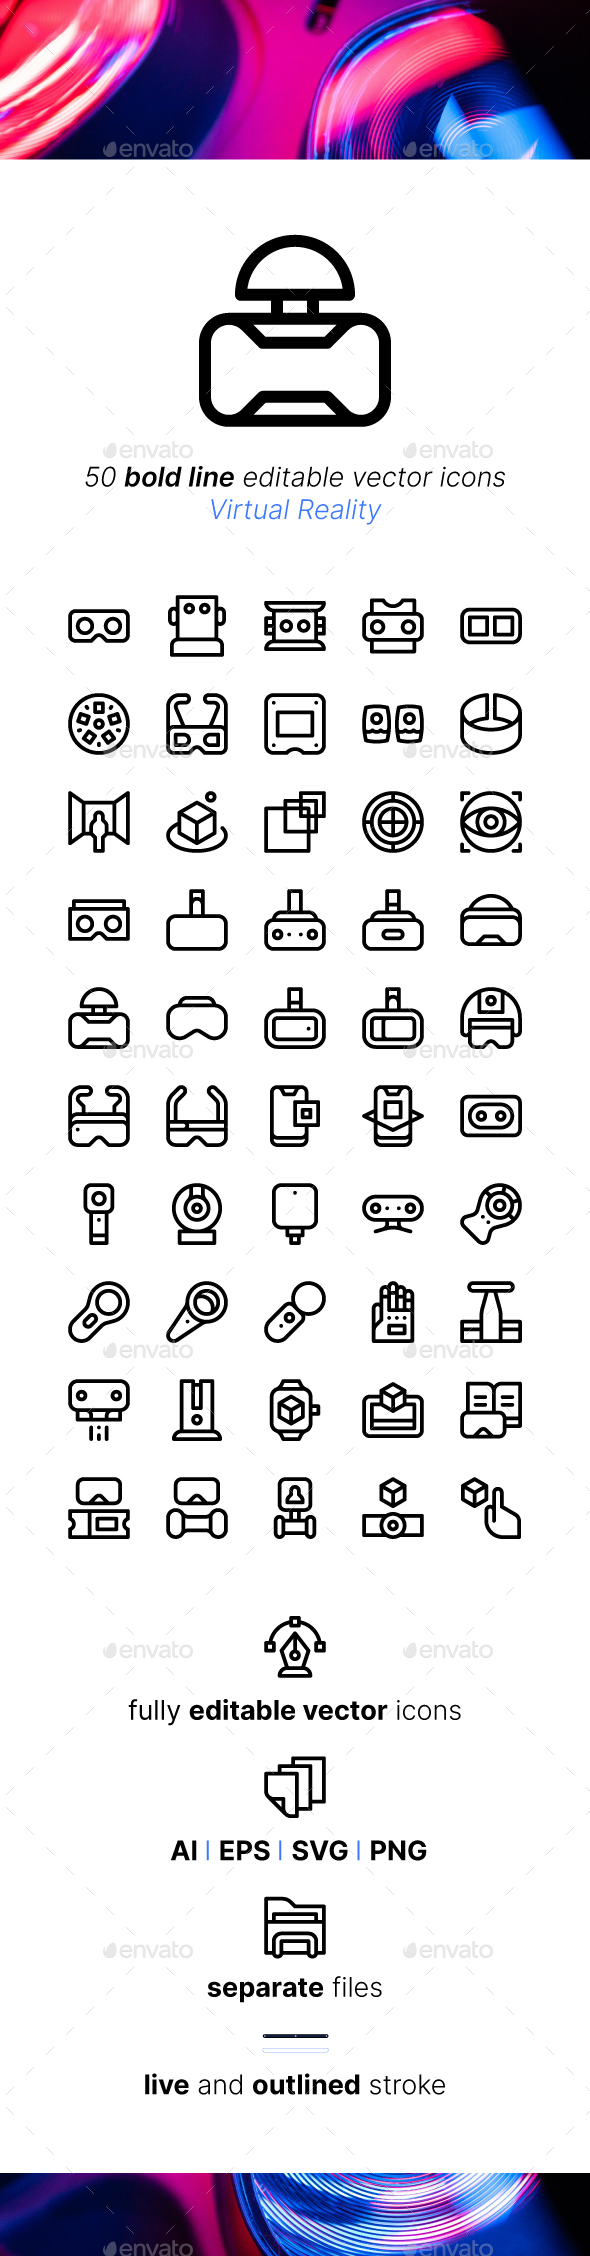 [DOWNLOAD]50 Virtual Reality Icons